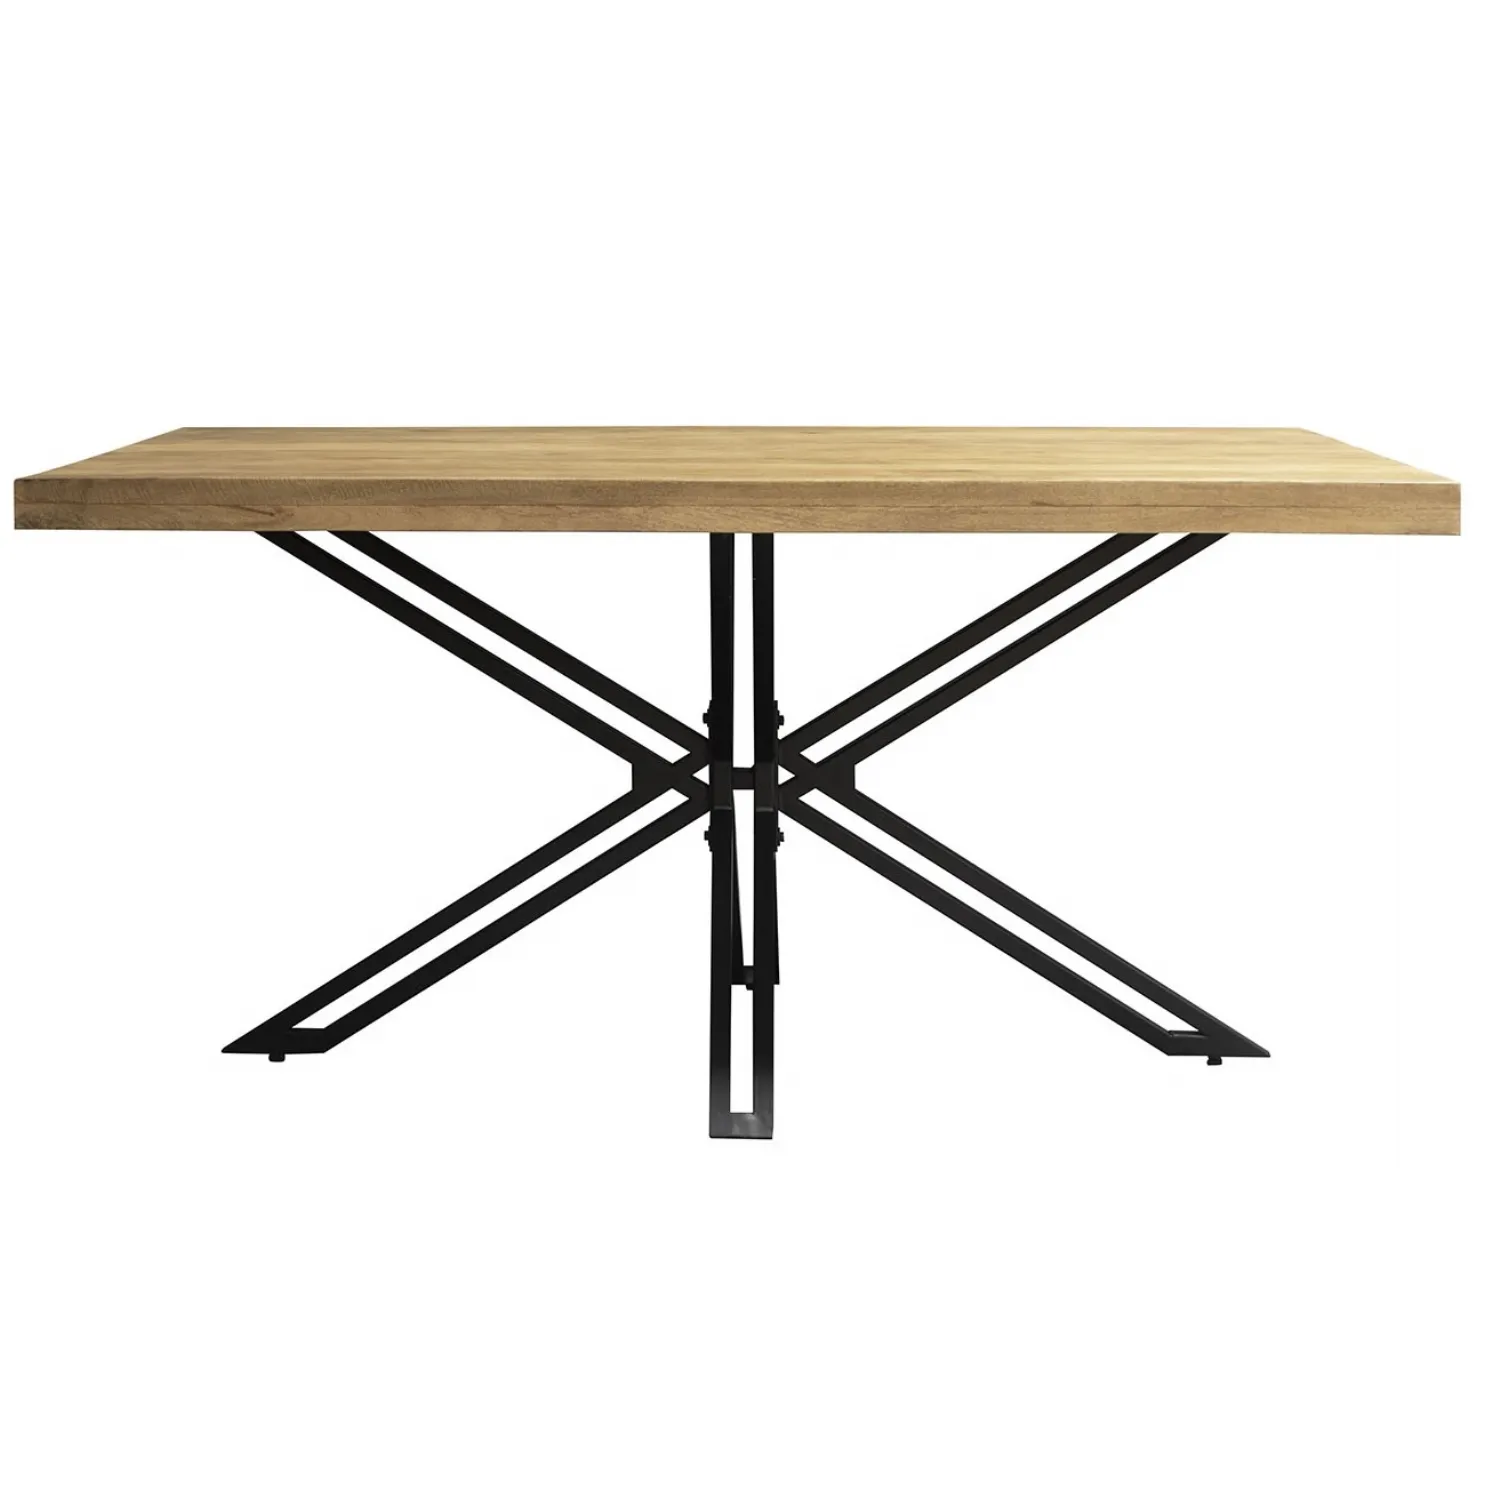 Mango Wood 160cm Dining Table with Black Metal Spider Legs